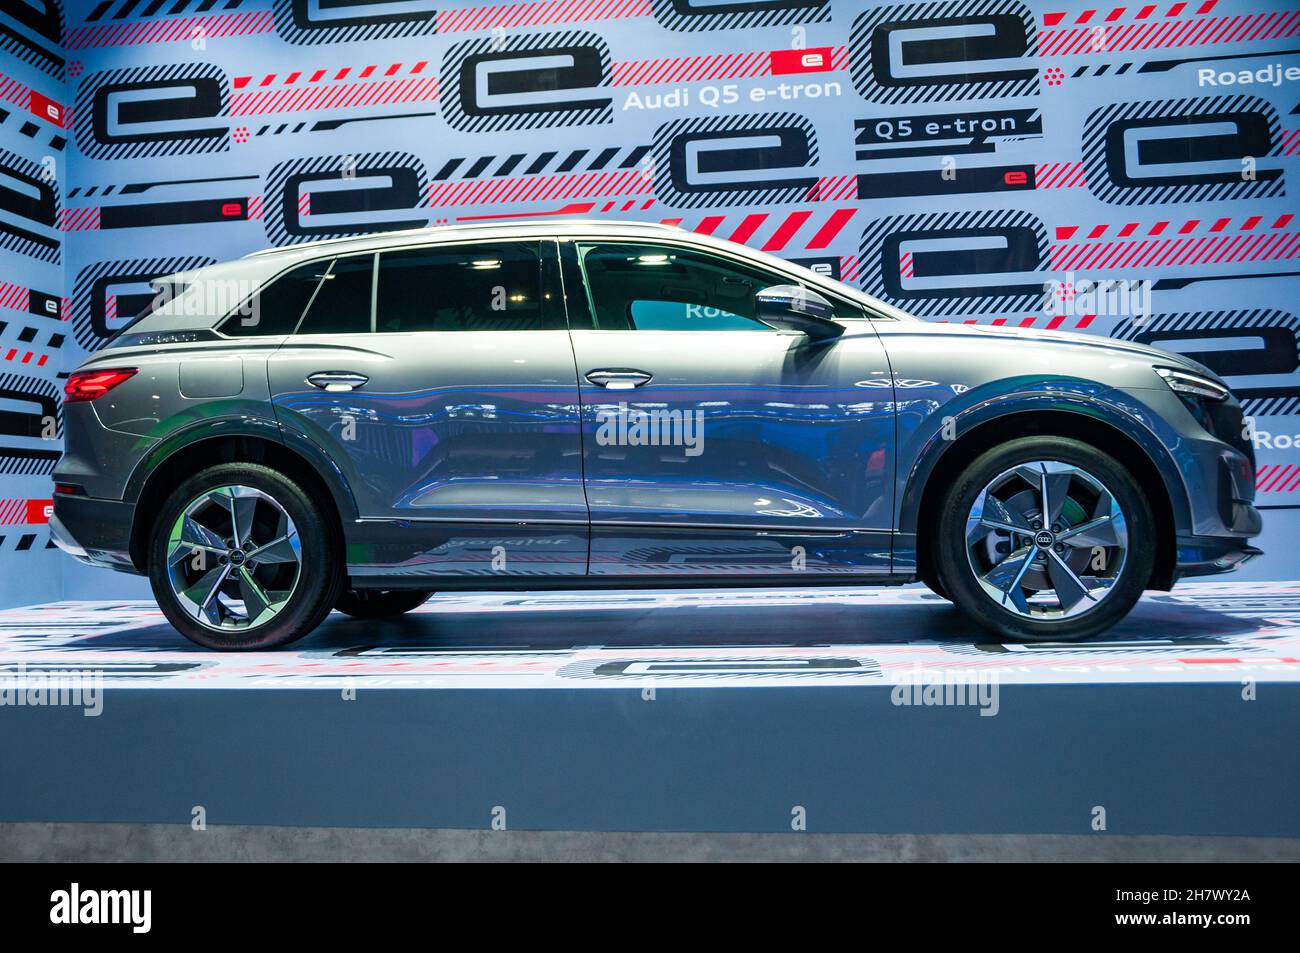 Audi Q5 e-tron seen on display at the 2021 Guangzhou Auto Show, Guangdong Province, China. Stock Photo